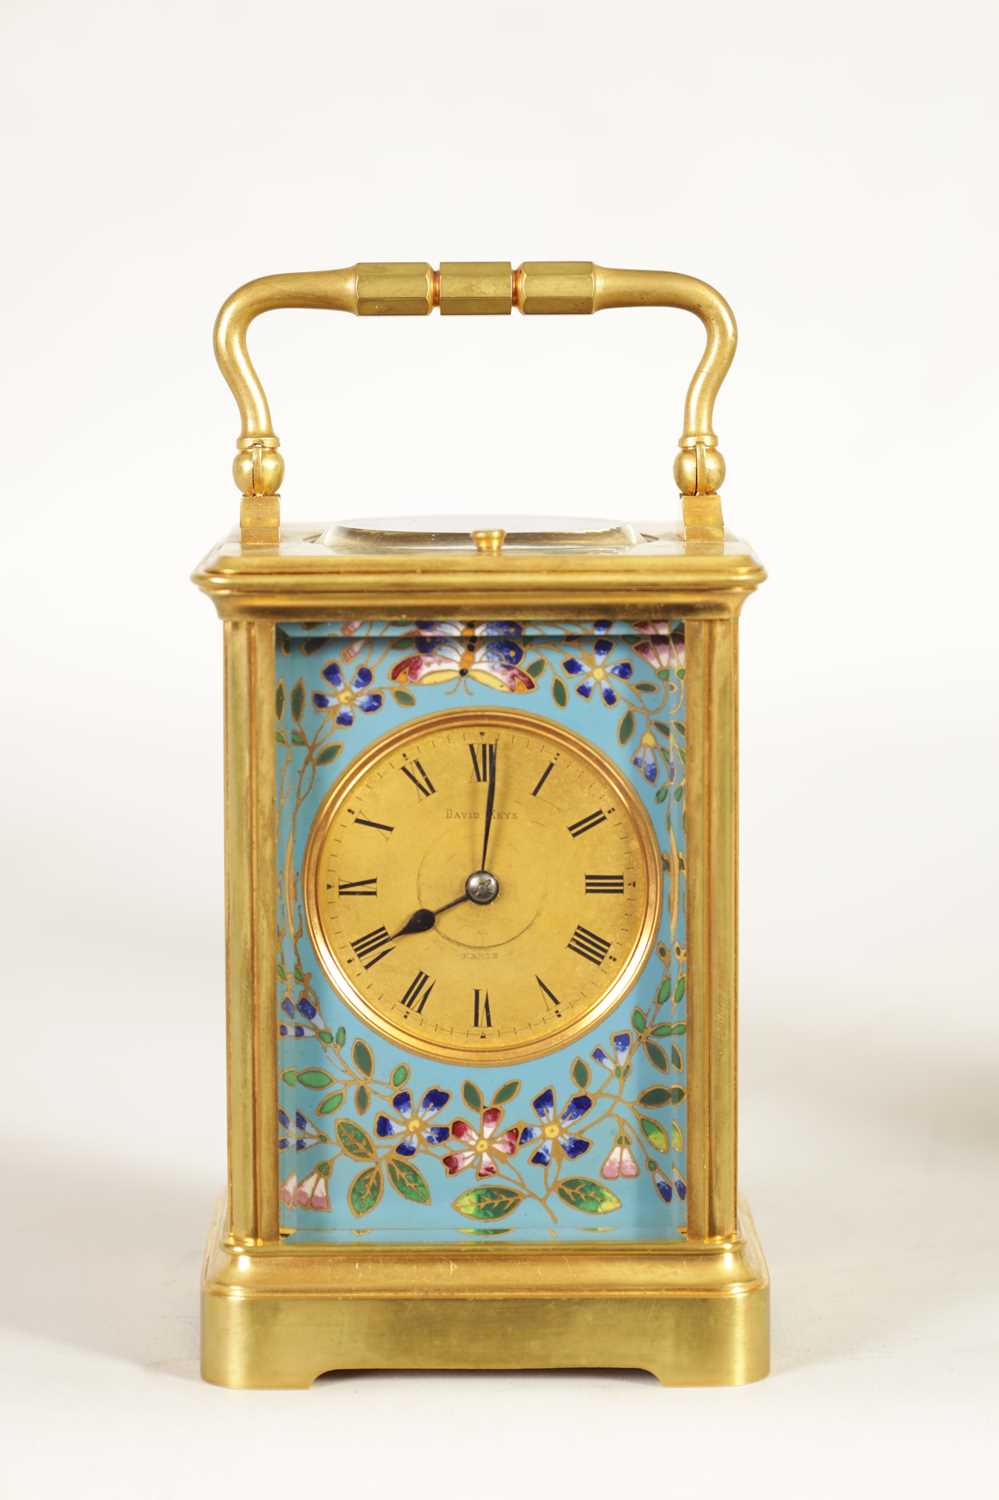 A LATE 19TH CENTURY FRENCH GILT BRASS AND CLOISONNE ENAMEL REPEATING CARRIGE CLOCK - Image 3 of 9